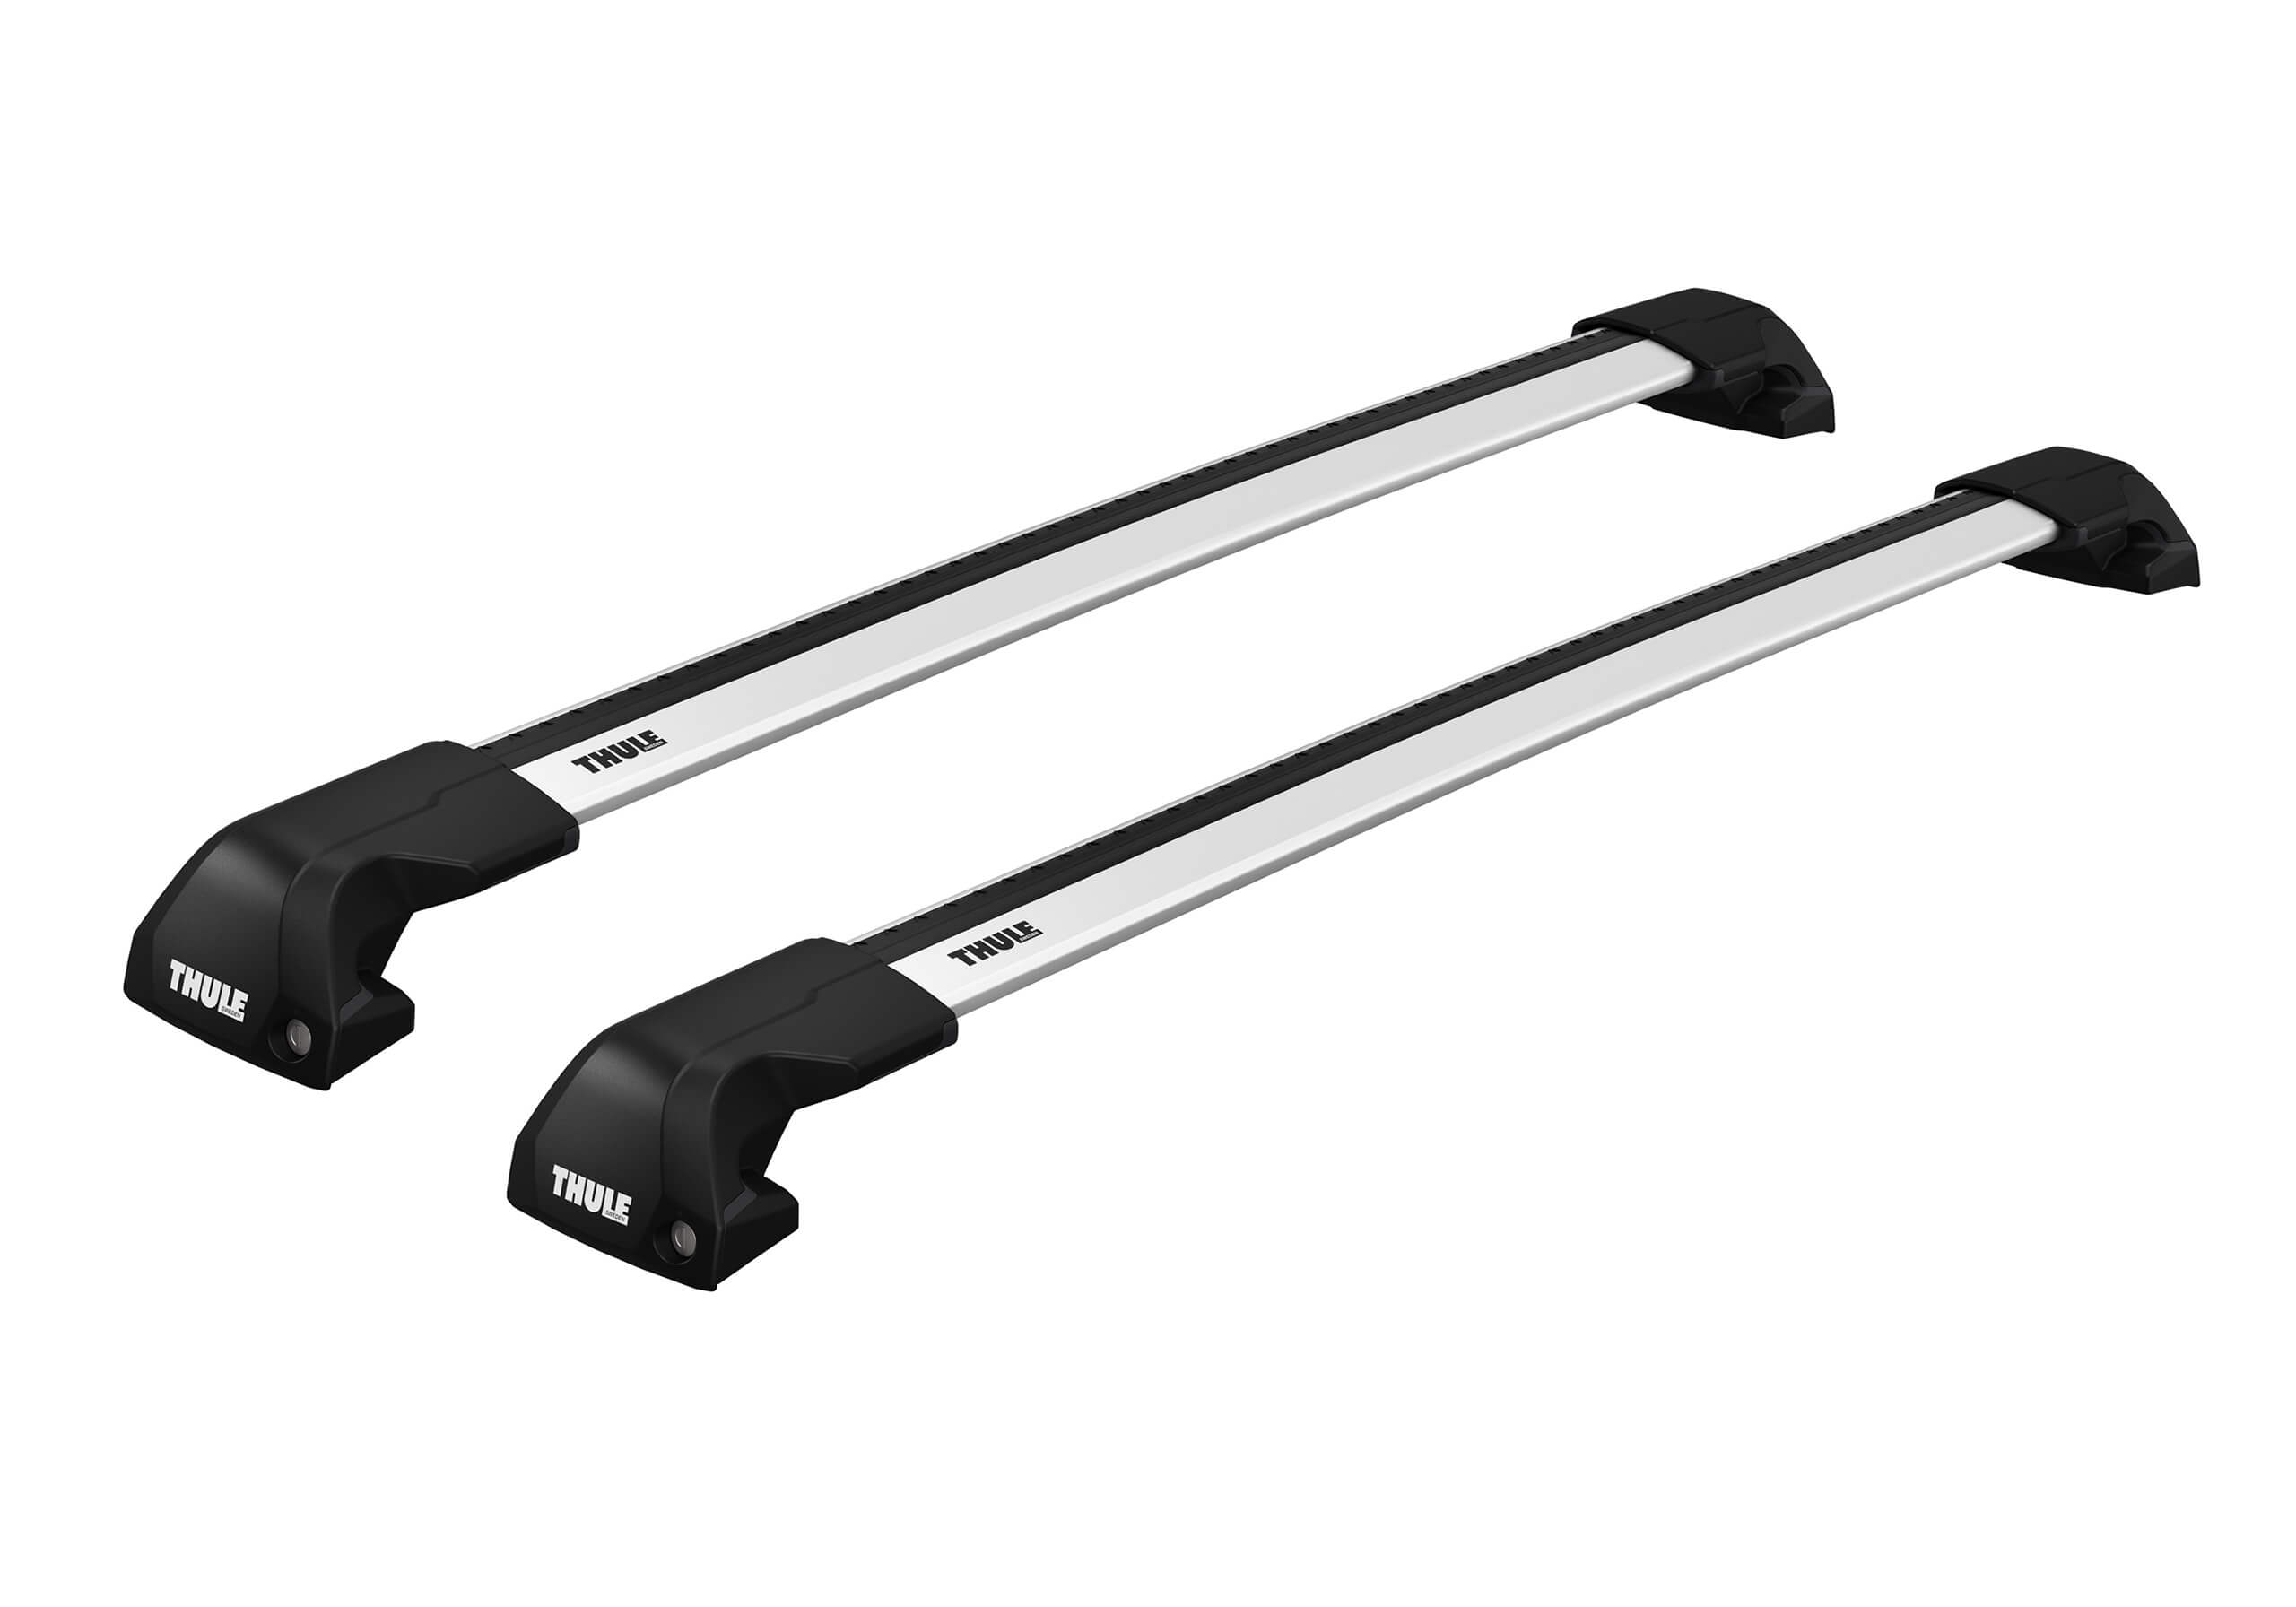 Ford Galaxy (2015 onwards):Thule Edge silver WingBars package - 7206, 7214, 7213, 6018